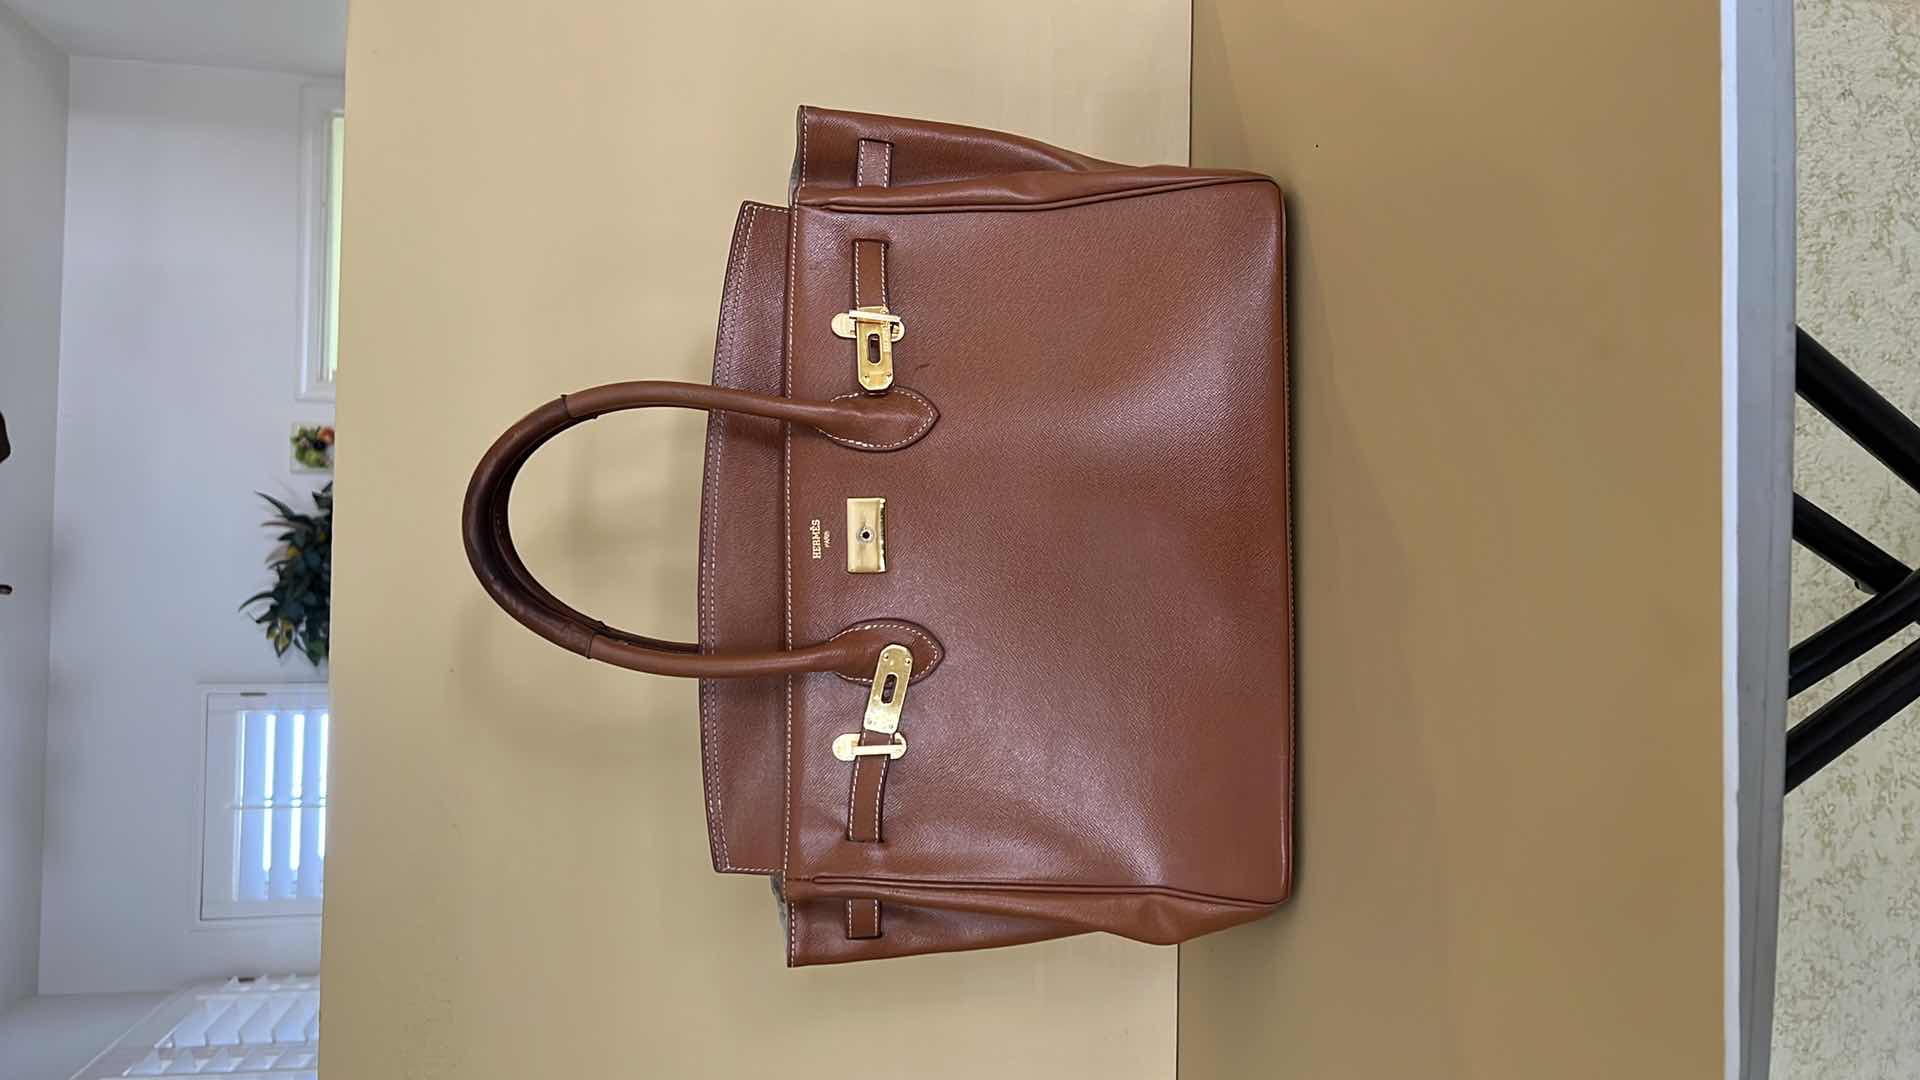 Photo 6 of TAN LEATHER HERMES LABEL HANDBAG (NOT AUTHENTIC)